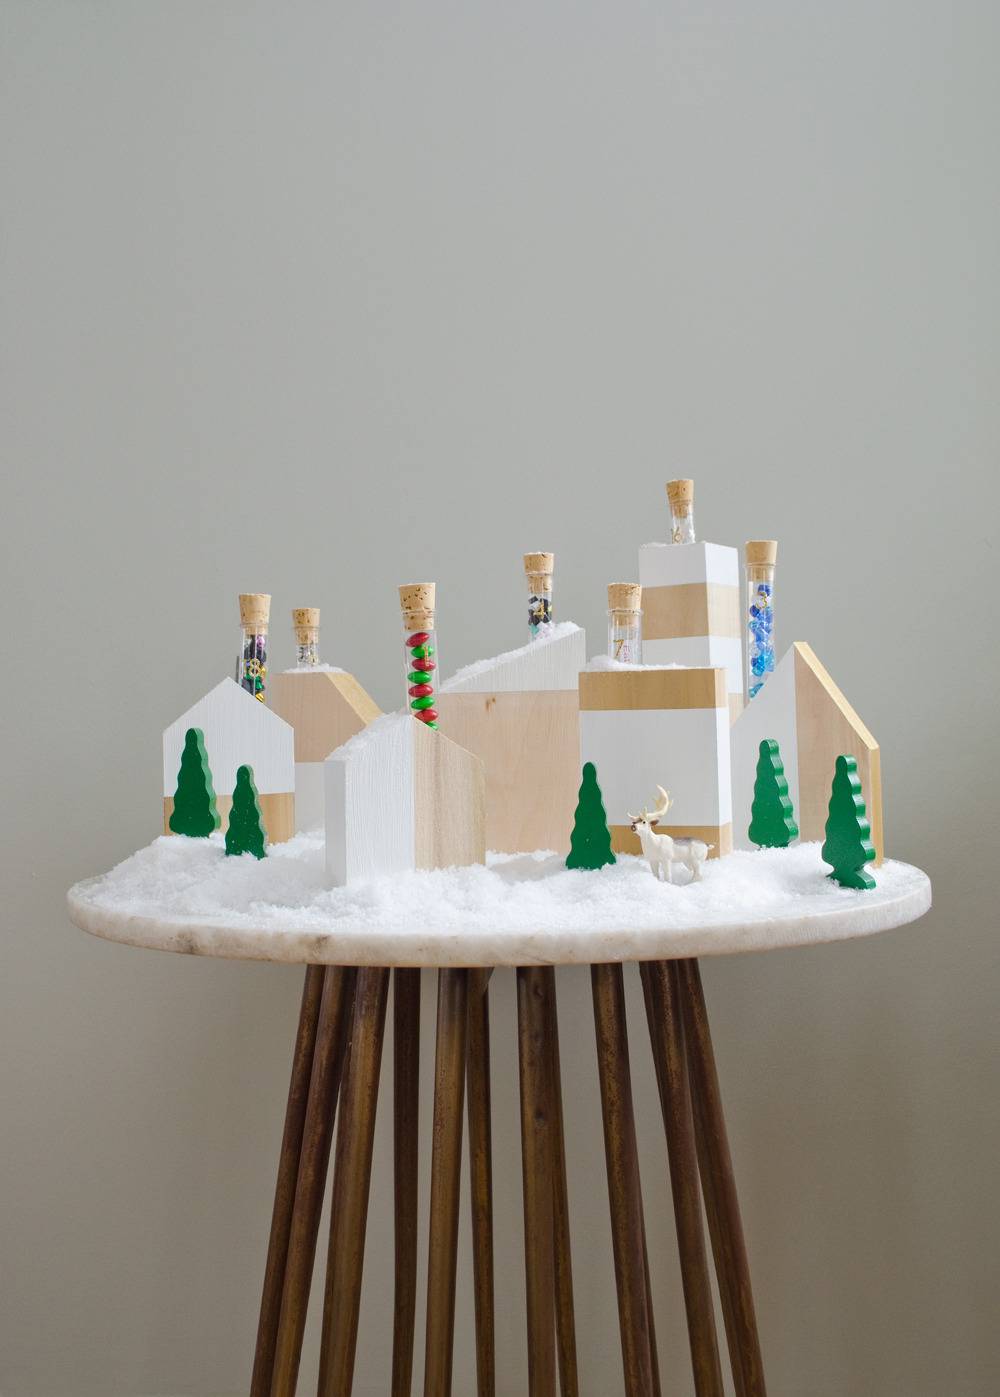 A Christmas village sits on a small table near a grey wall.